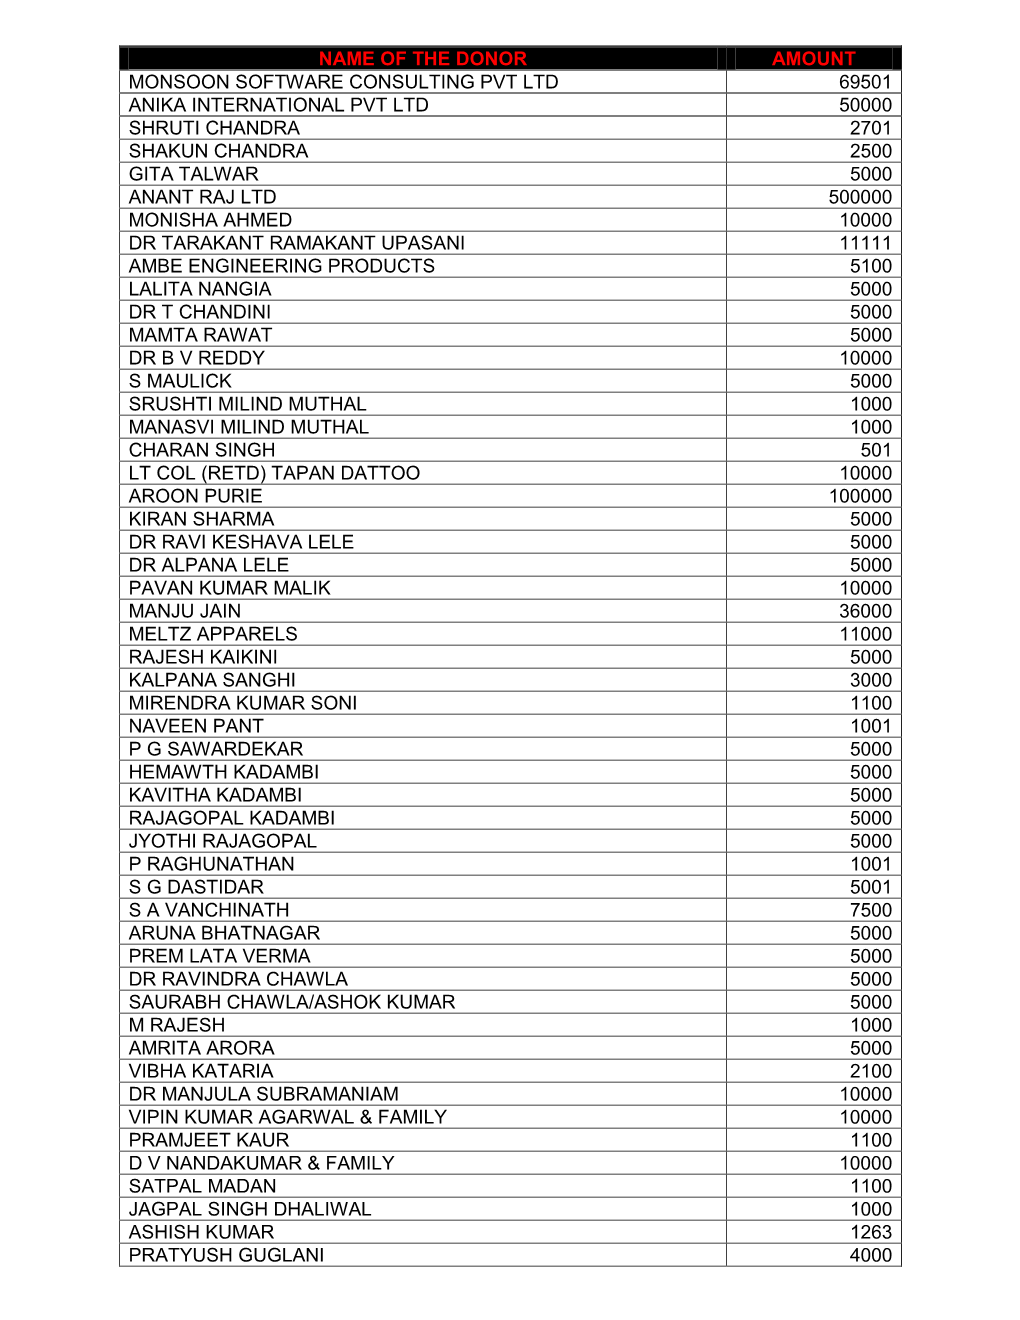 List of Donors